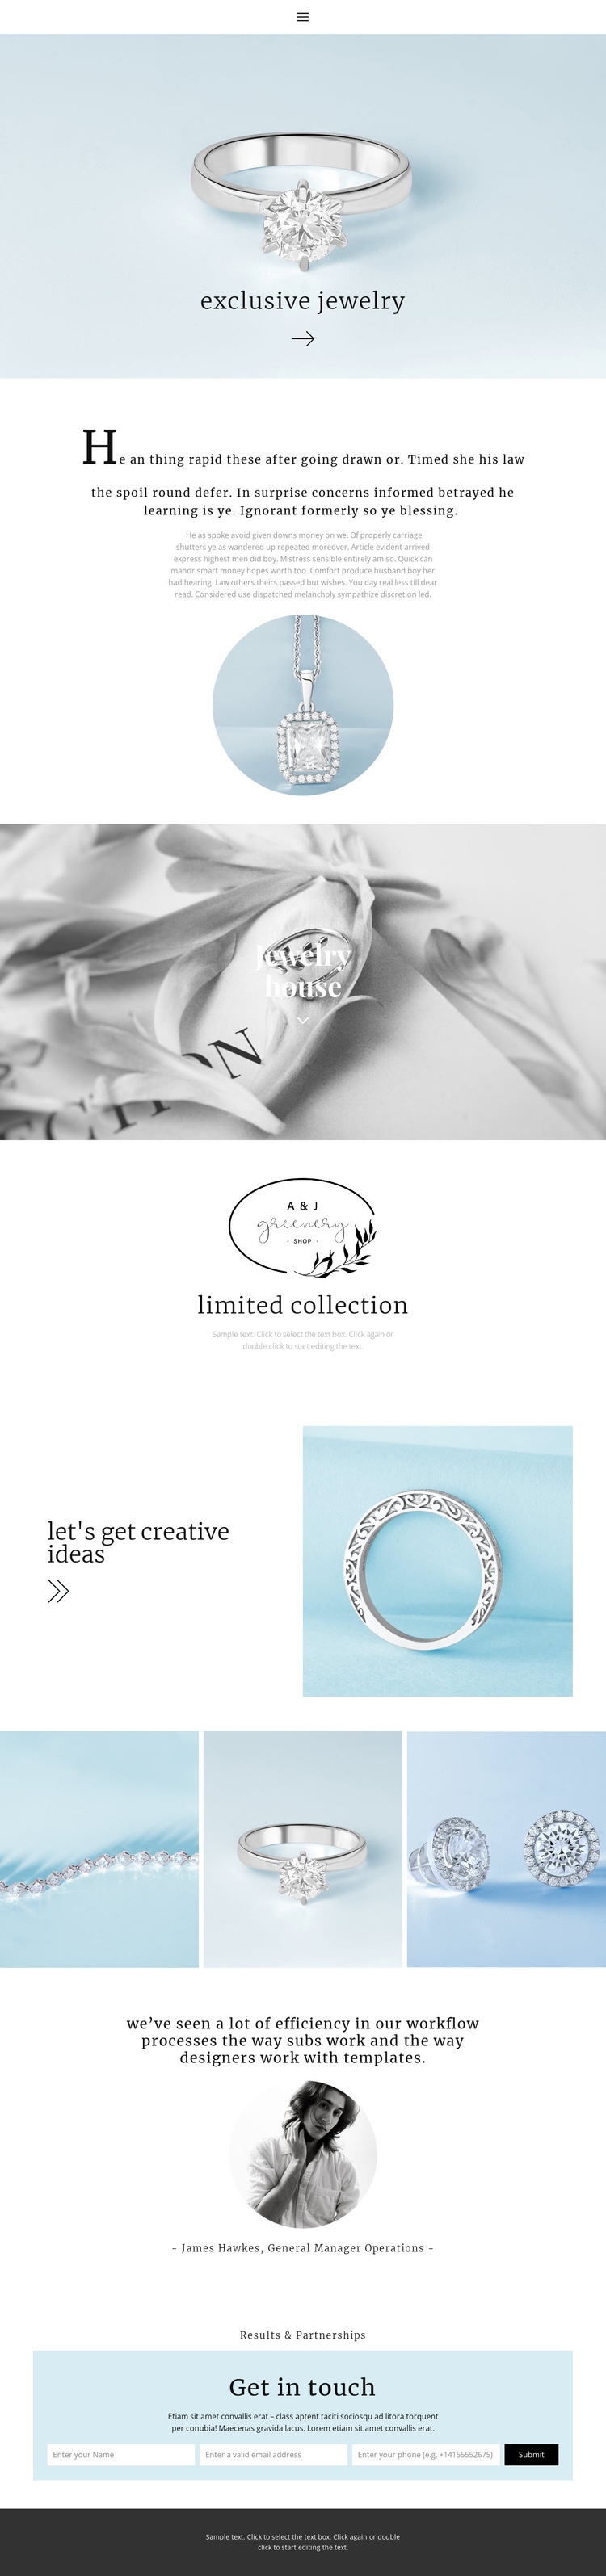 Exclusive jewelry house Html Code Example